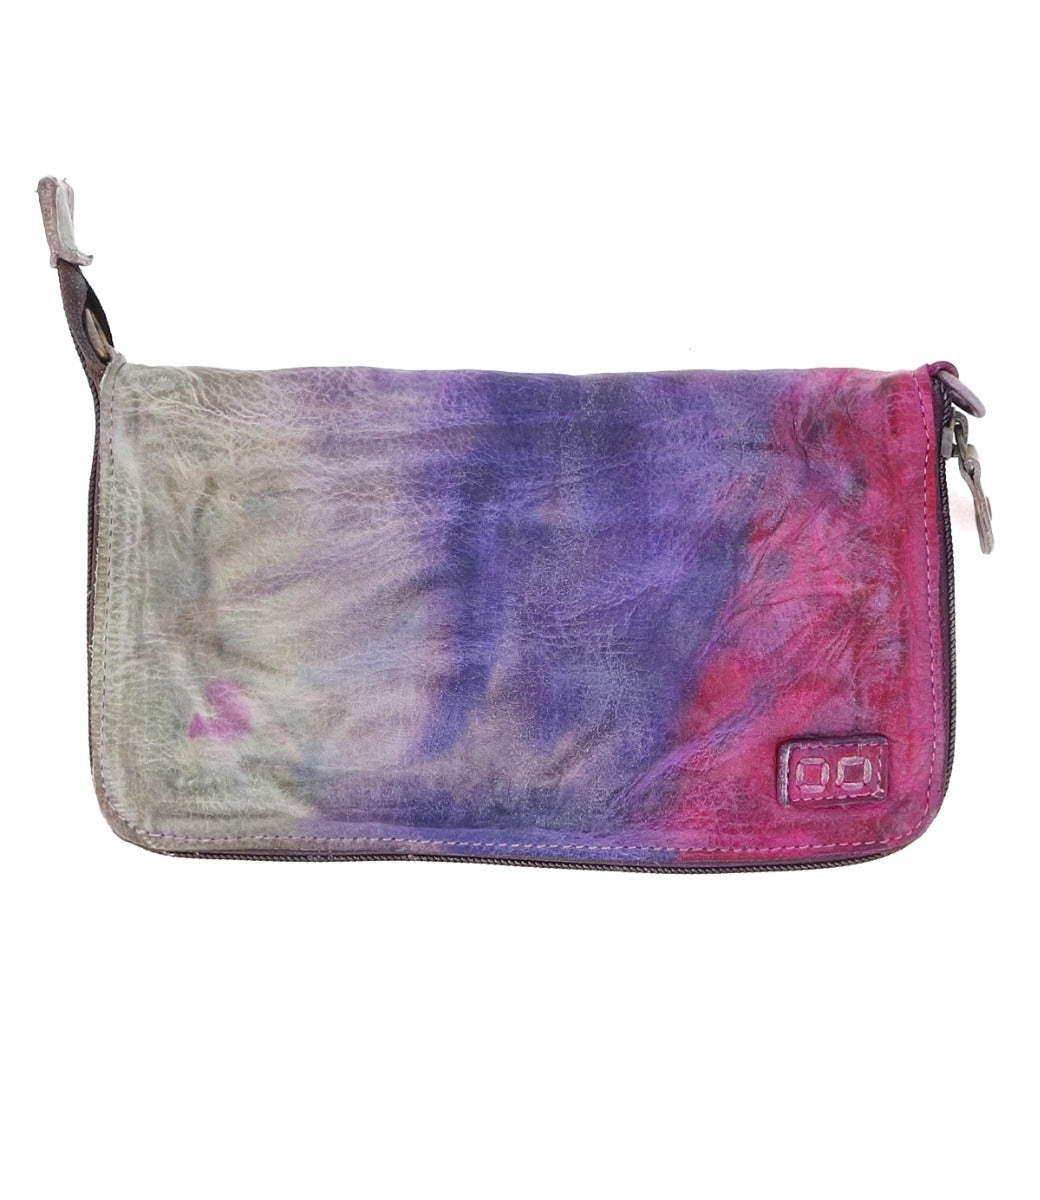 Bed Stu Templeton II pink and purple leather multi-functional pure leather clutch.